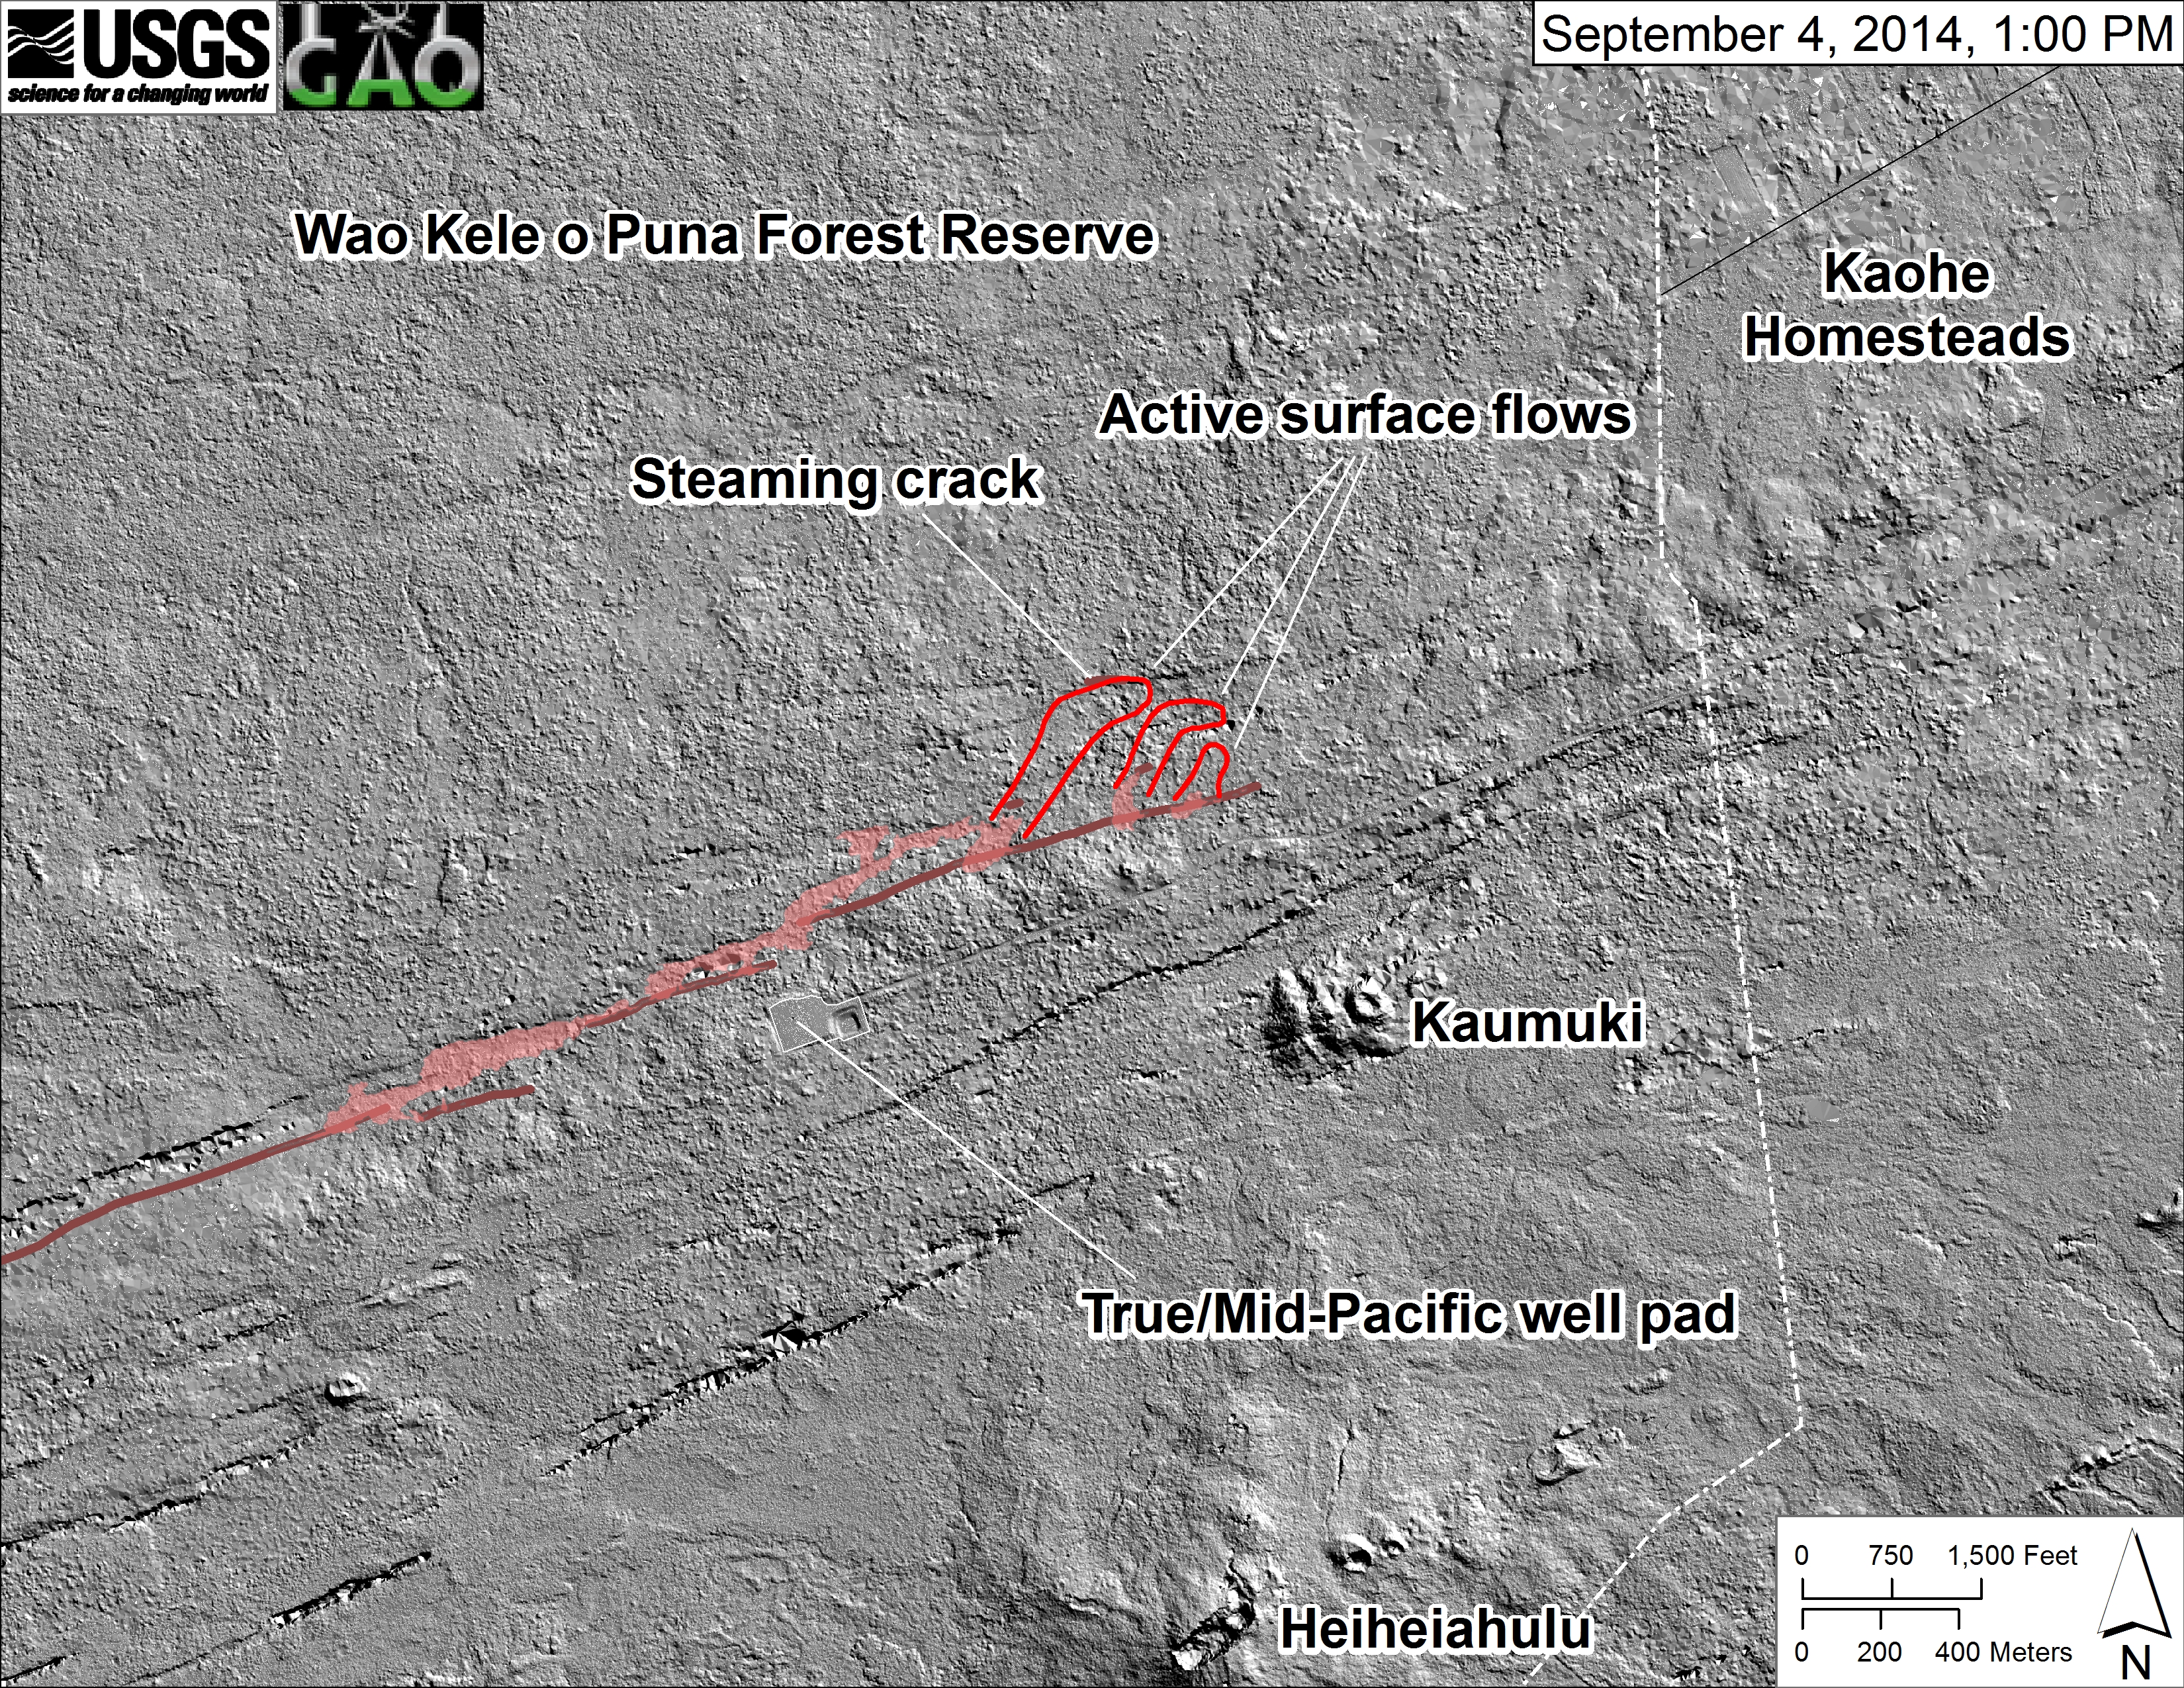 This shaded-relief map, courtesy of the Carnegie Airborne Observatory, shows some of the cracks and faults that are present in Kīlauea’s East Rift Zone. The June 27th flow is partly transparent and shown in pink, while the active surface lava at 1 PM on September 4 are outlined in red. The front of the western of these three pads of lava was entering another ground crack, which was steaming. (USGS HVO)